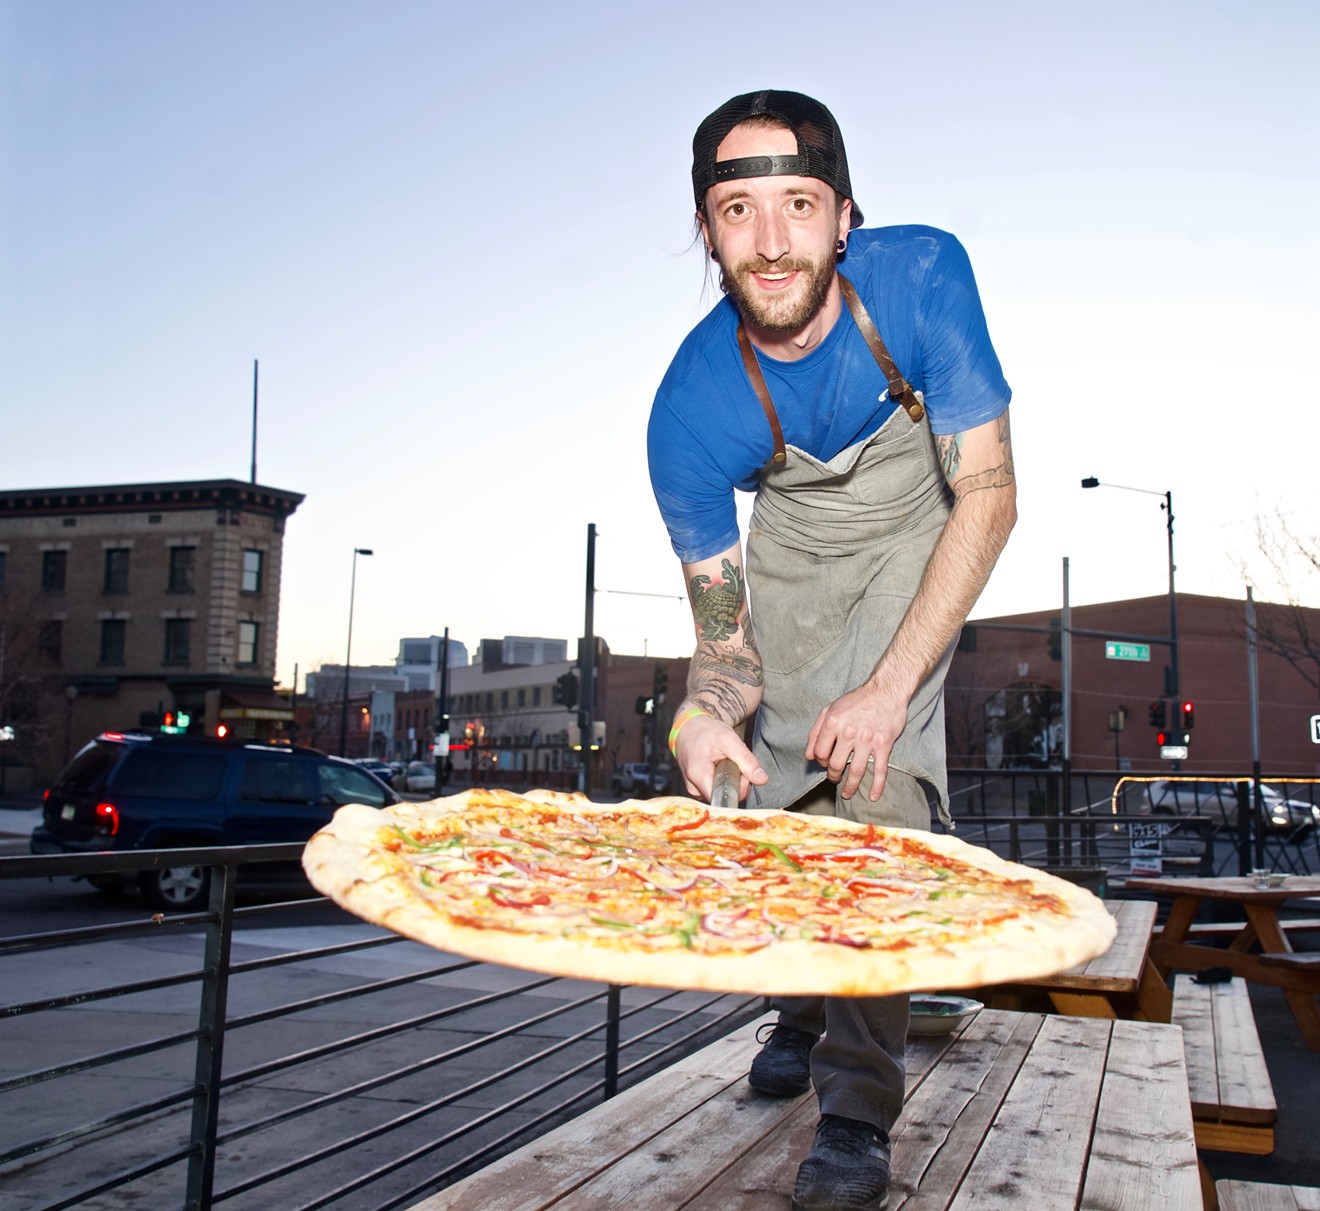 Chef Mat Shumaker presents a New York-style pie at Famous Original J's.